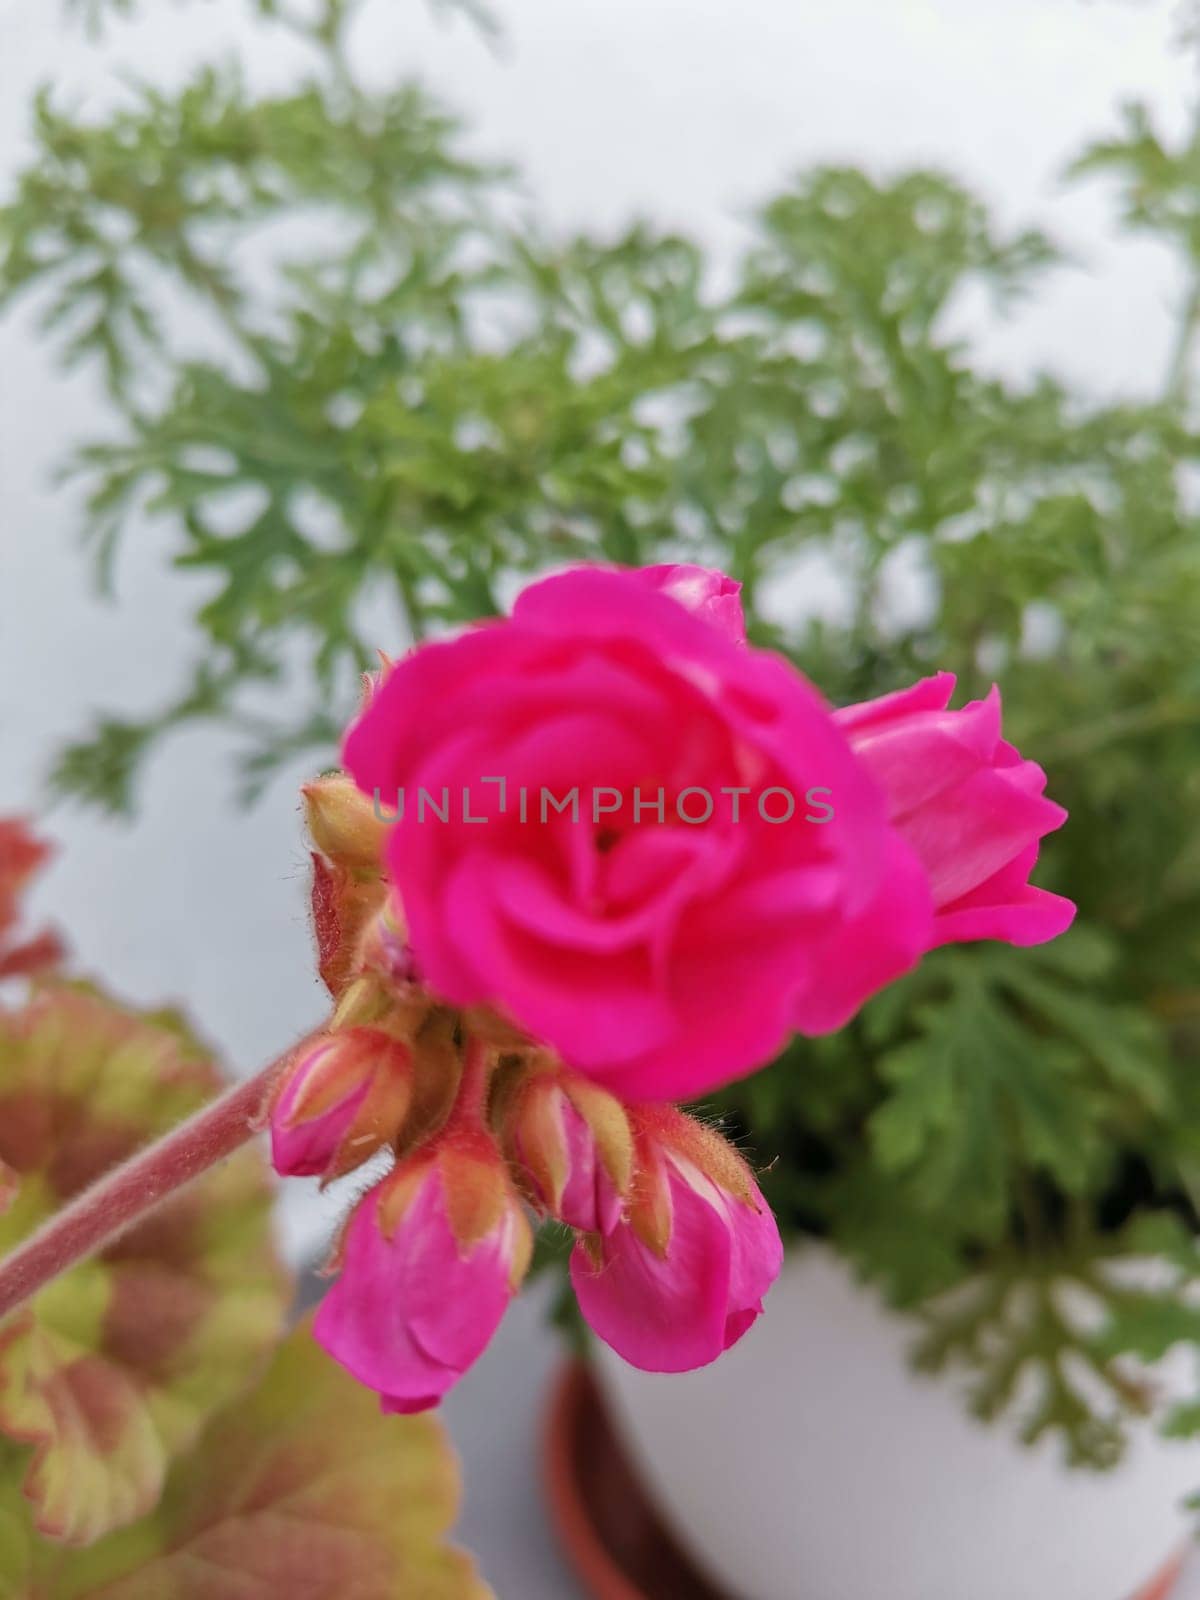 Pink geranium flowers from the pot by Fran71